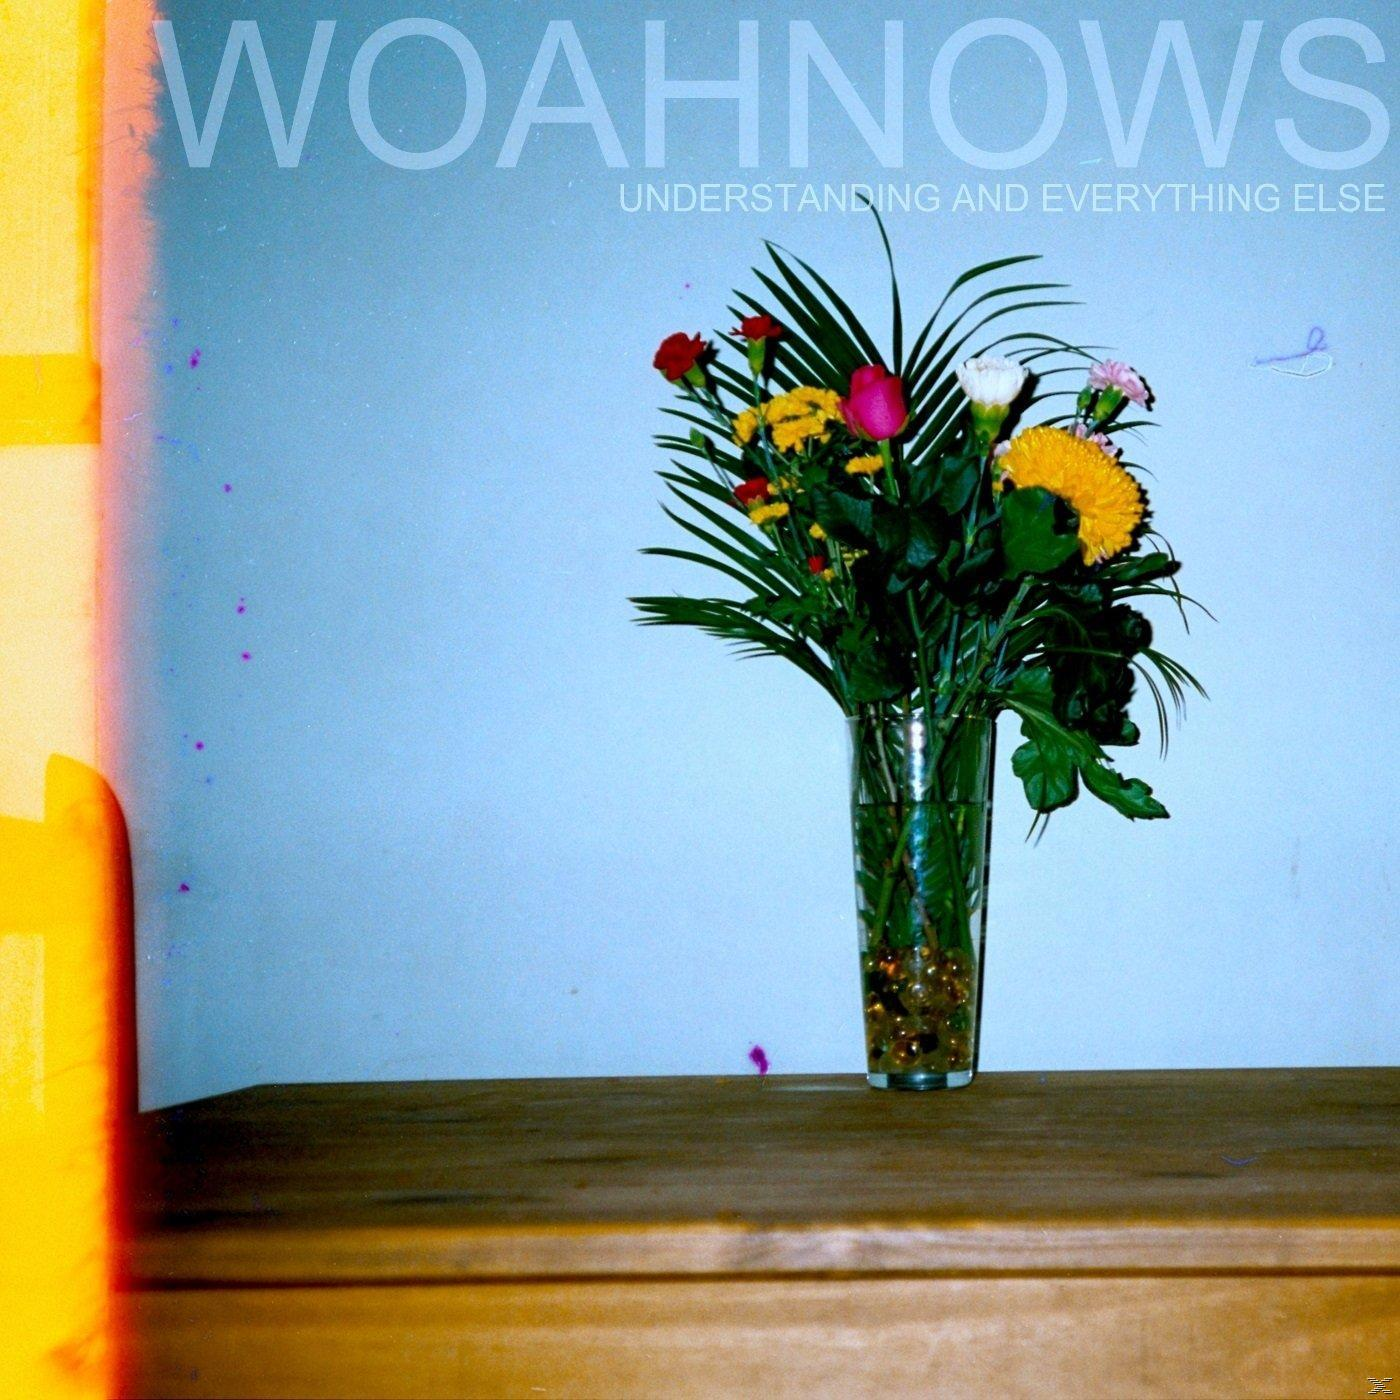 And Understanding E Everything Woahnows - (CD) -